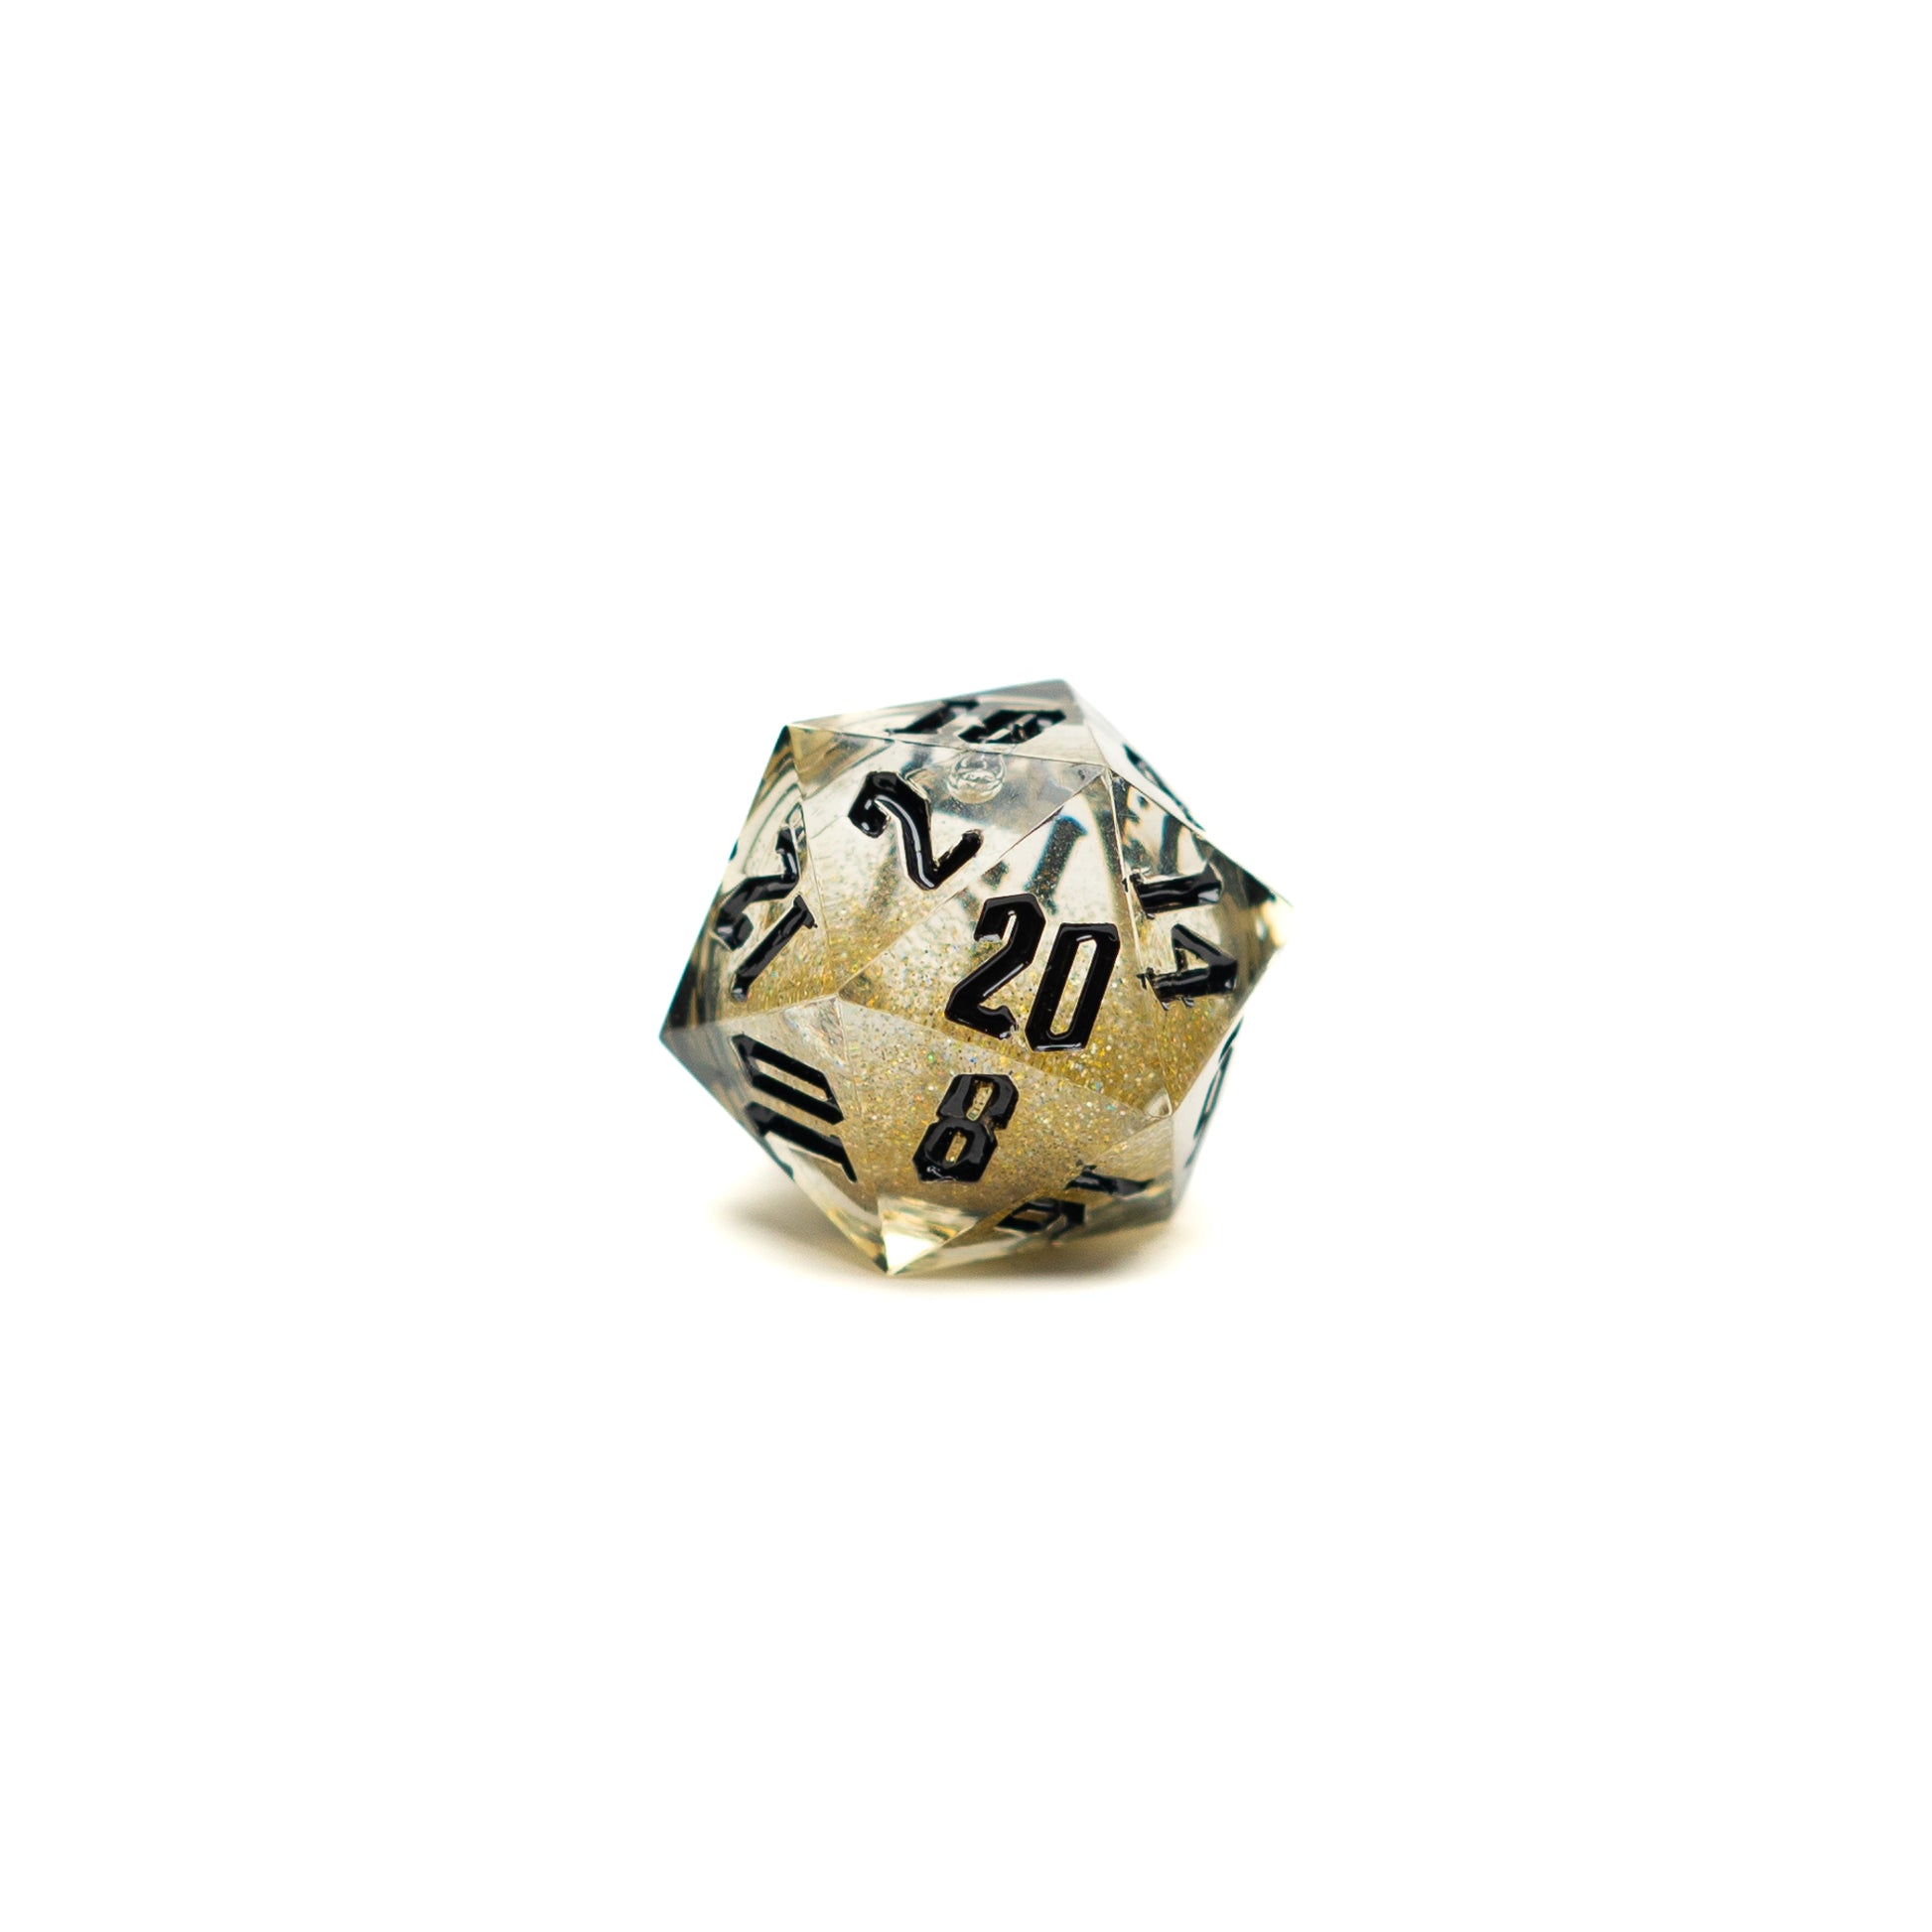 Roll Britannia Sharp Edge Resin Liquid Core Dungeons and Dragons D20 Dice with Gold Glitter Aesthetic